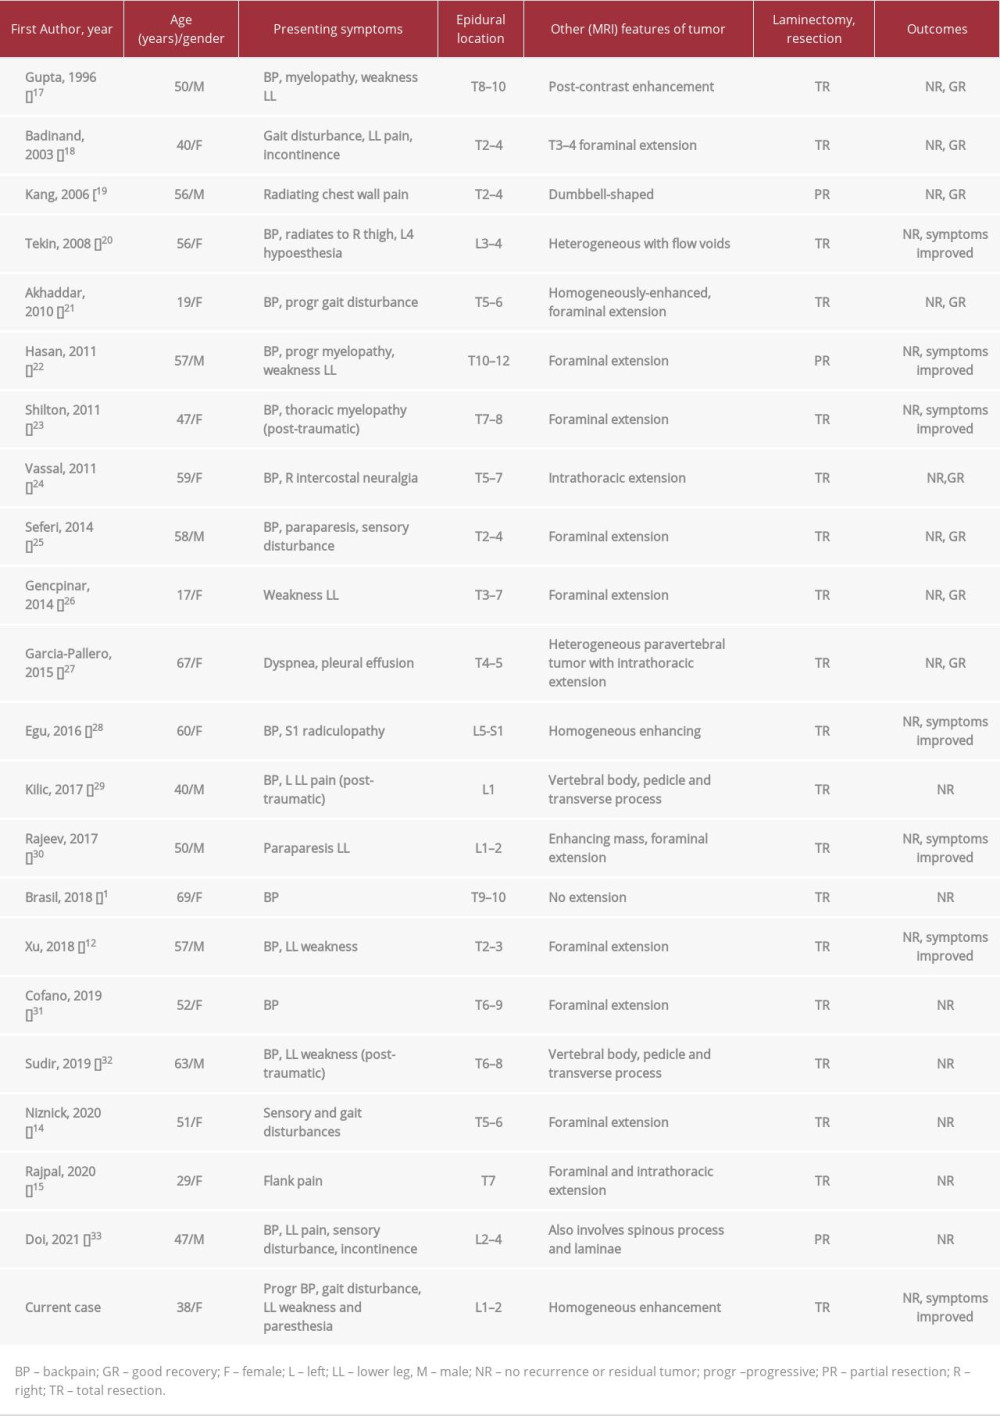 Summary of all the reported cases of spinal epidural capillary hemangioma in the literature.